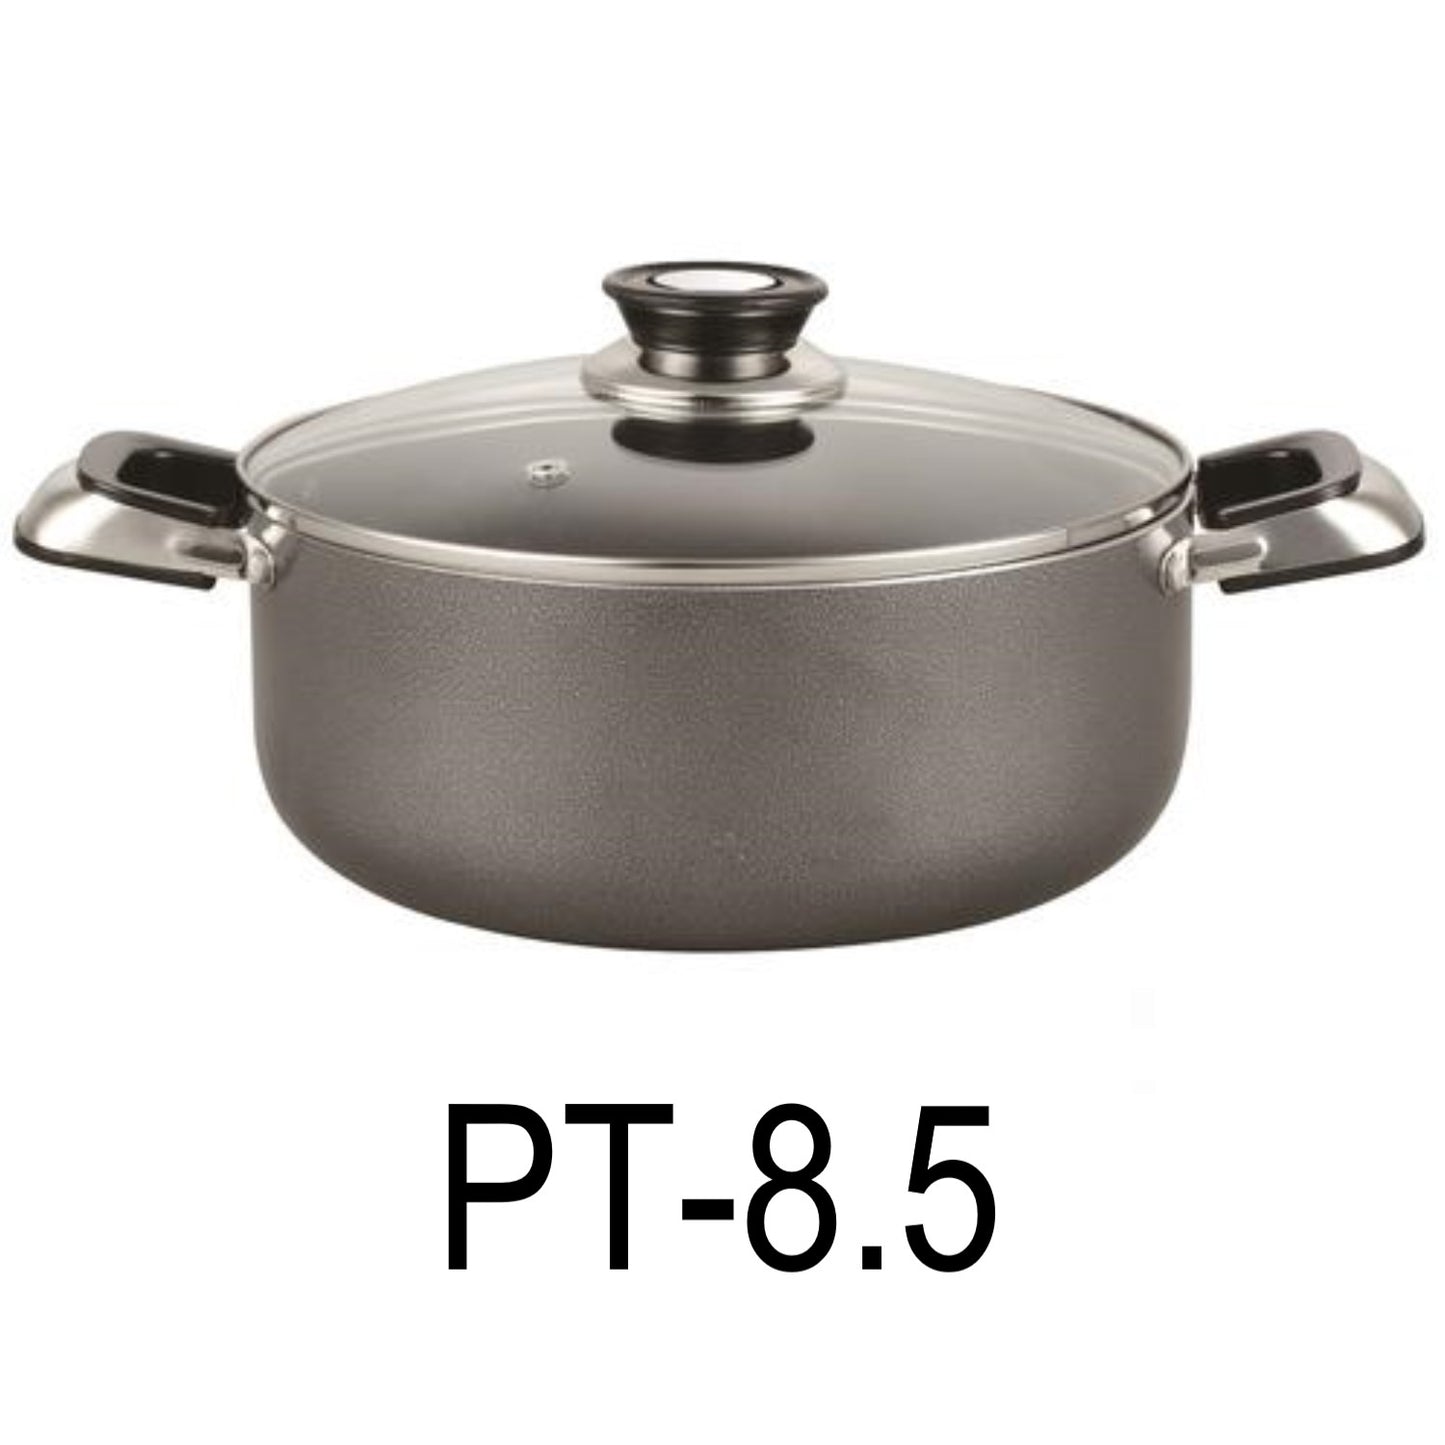 8.5 QT Non-stick Stockpot with Glass Lid